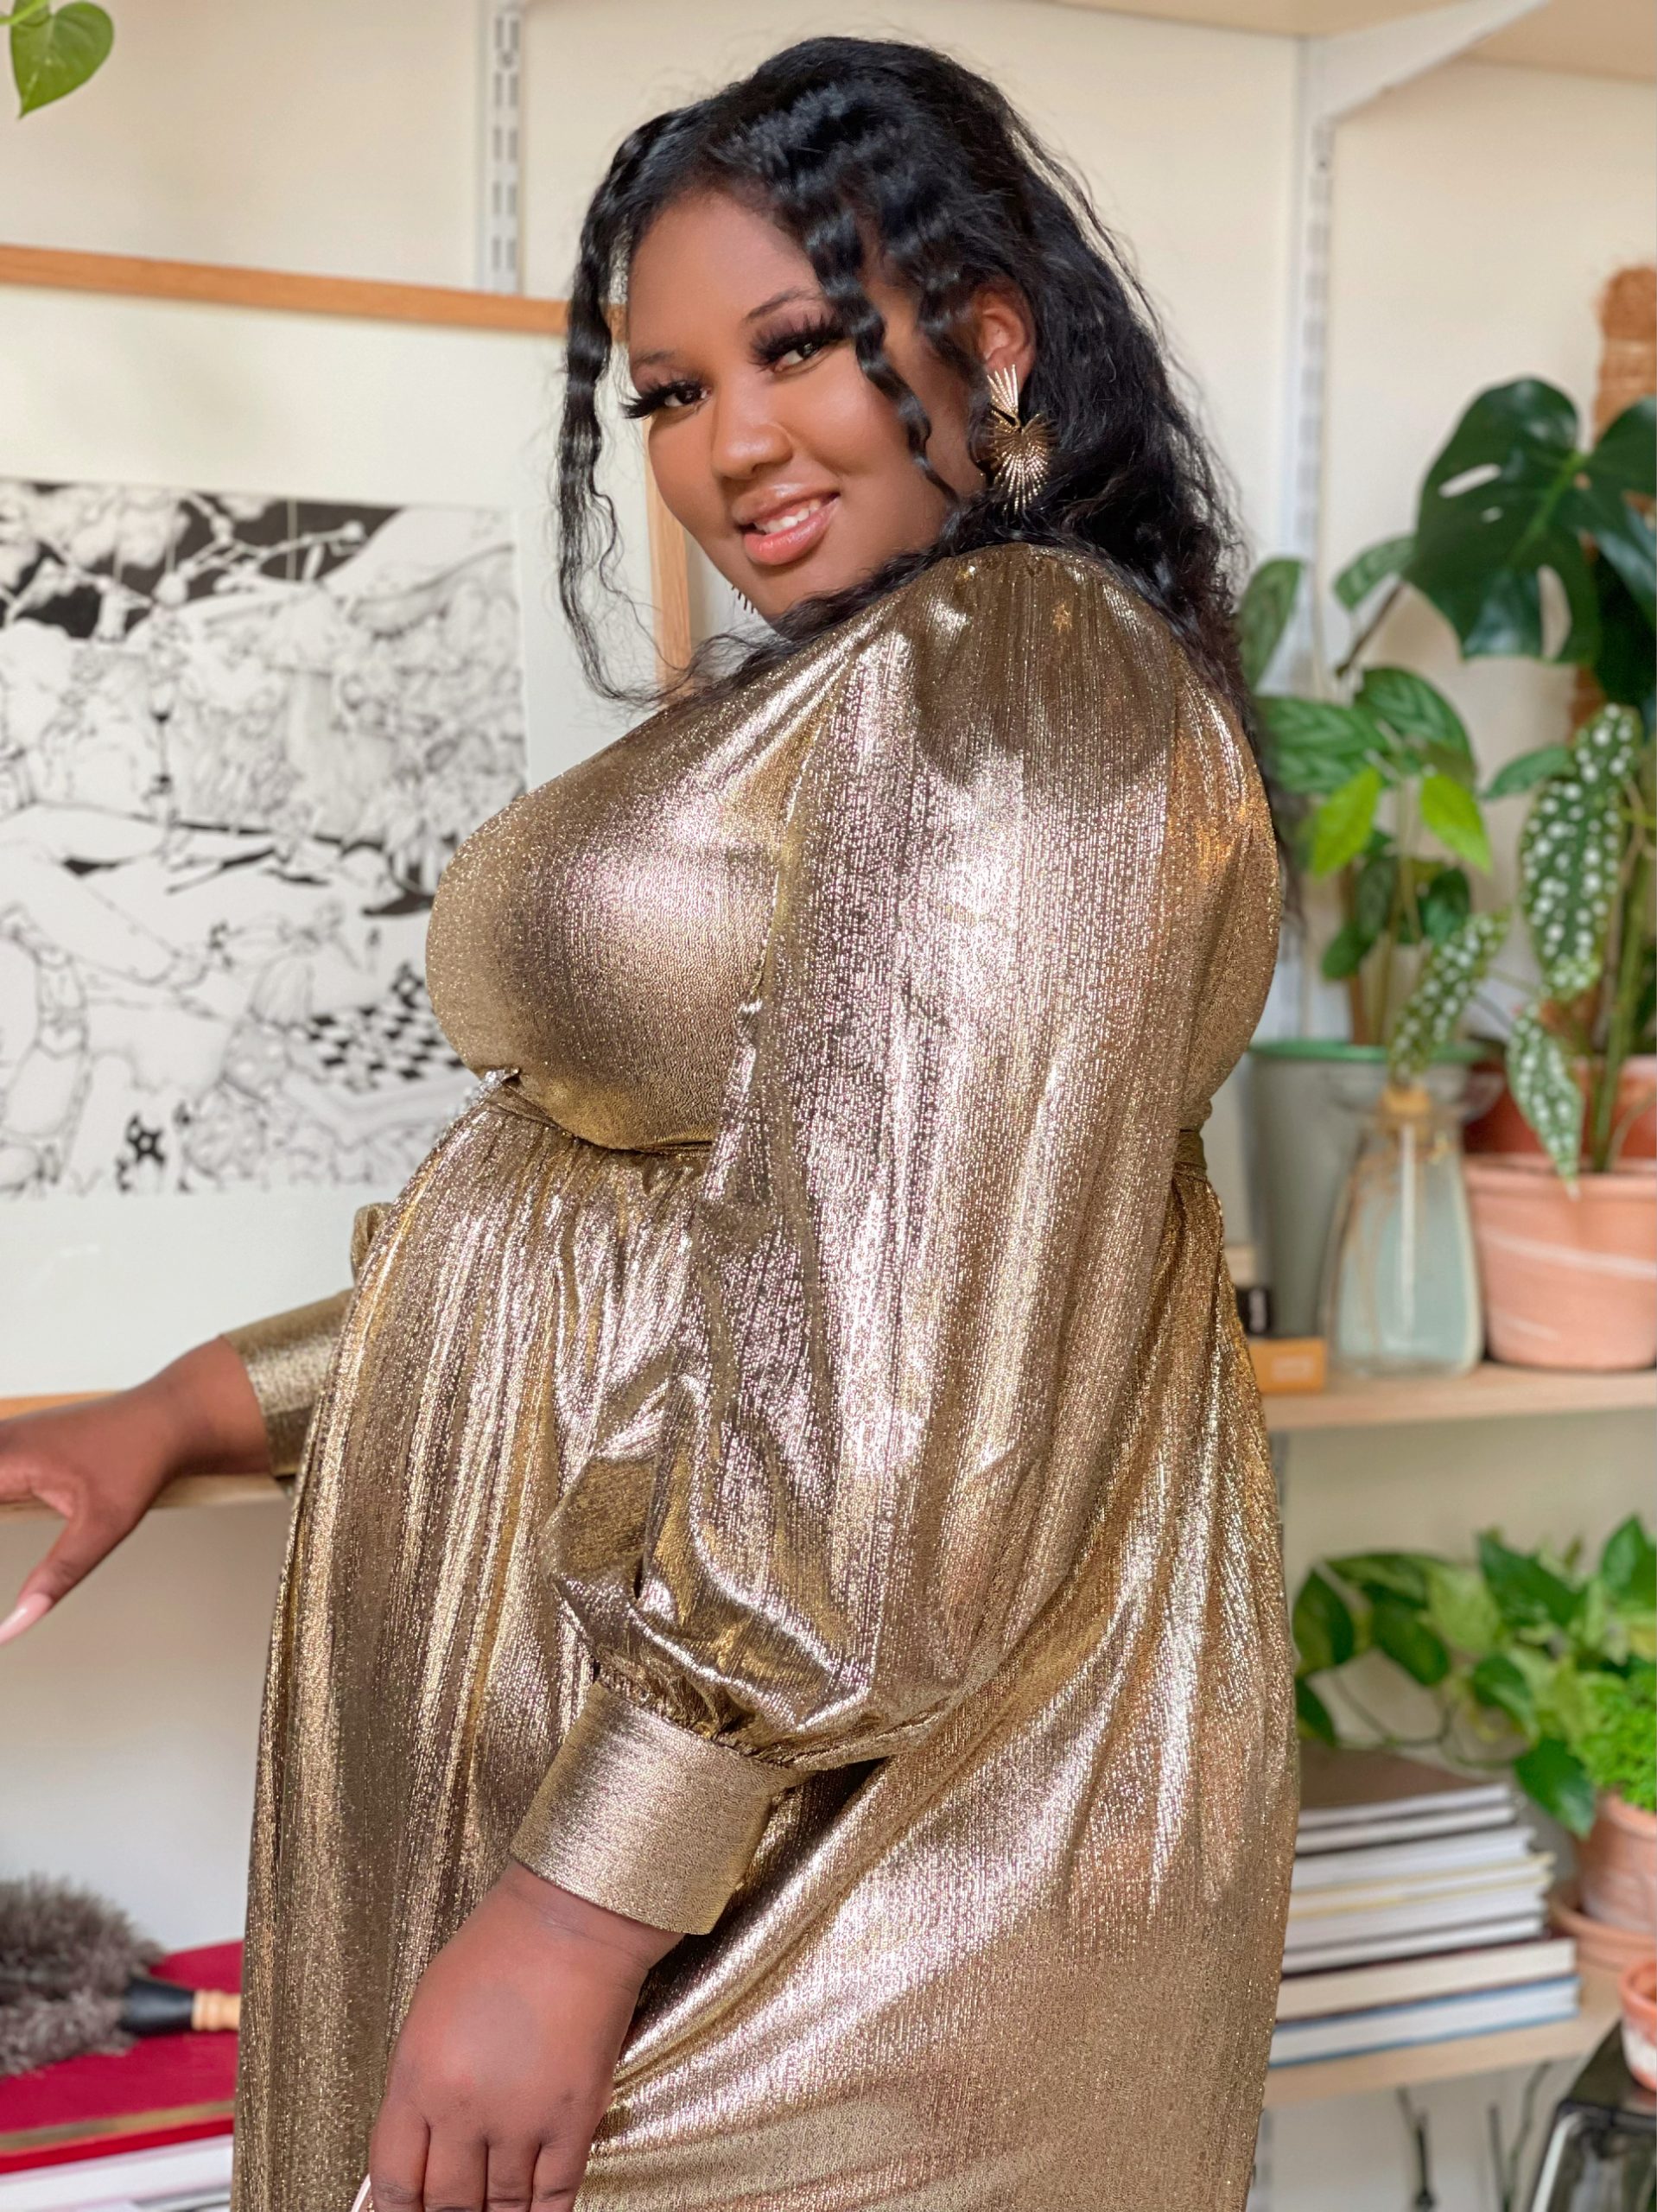 Raytysha Lashay picture in a golden dress